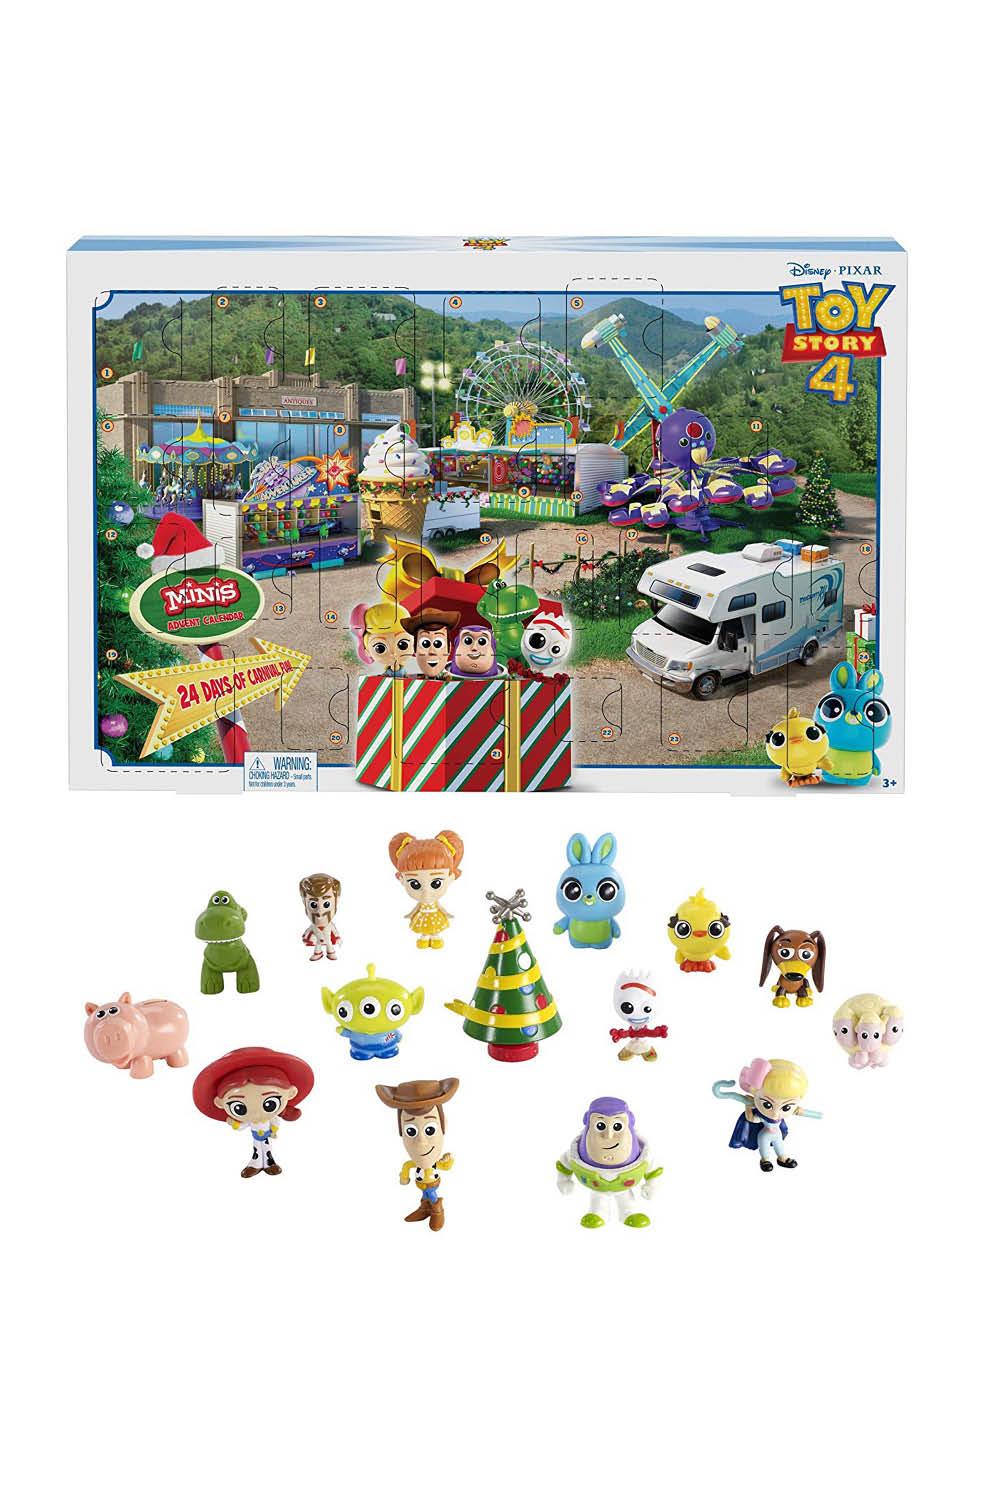 calendario de adviento 20196. Calendario de adviento de Toy Story